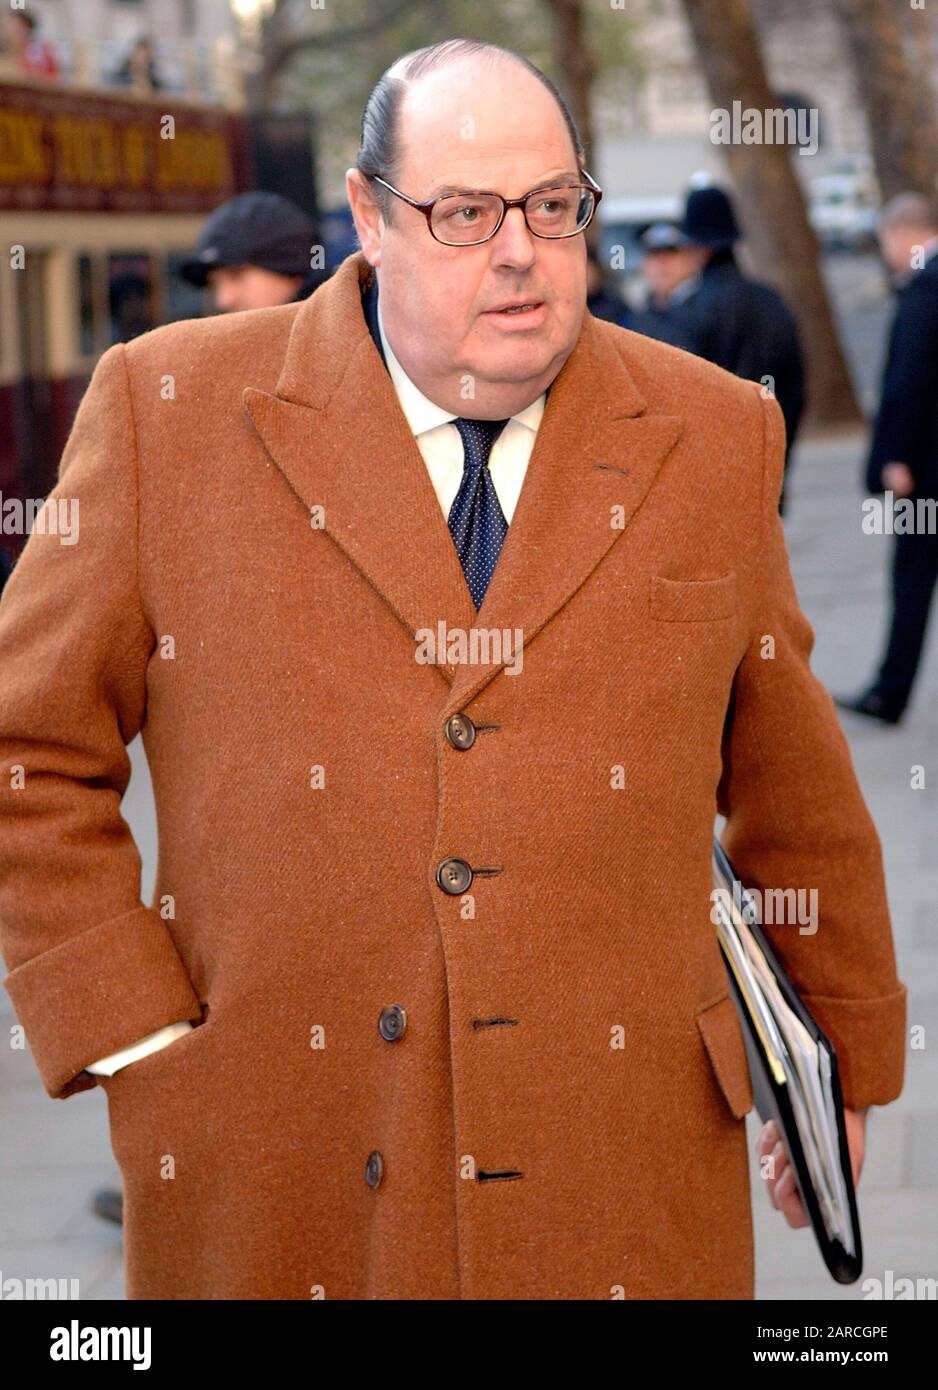 Lord Nicholas Soames arriving to give evidence in December 2007 at the Inquest into the deaths of Princess Diana and Dodi Fayed  at the High court in London. Stock Photo